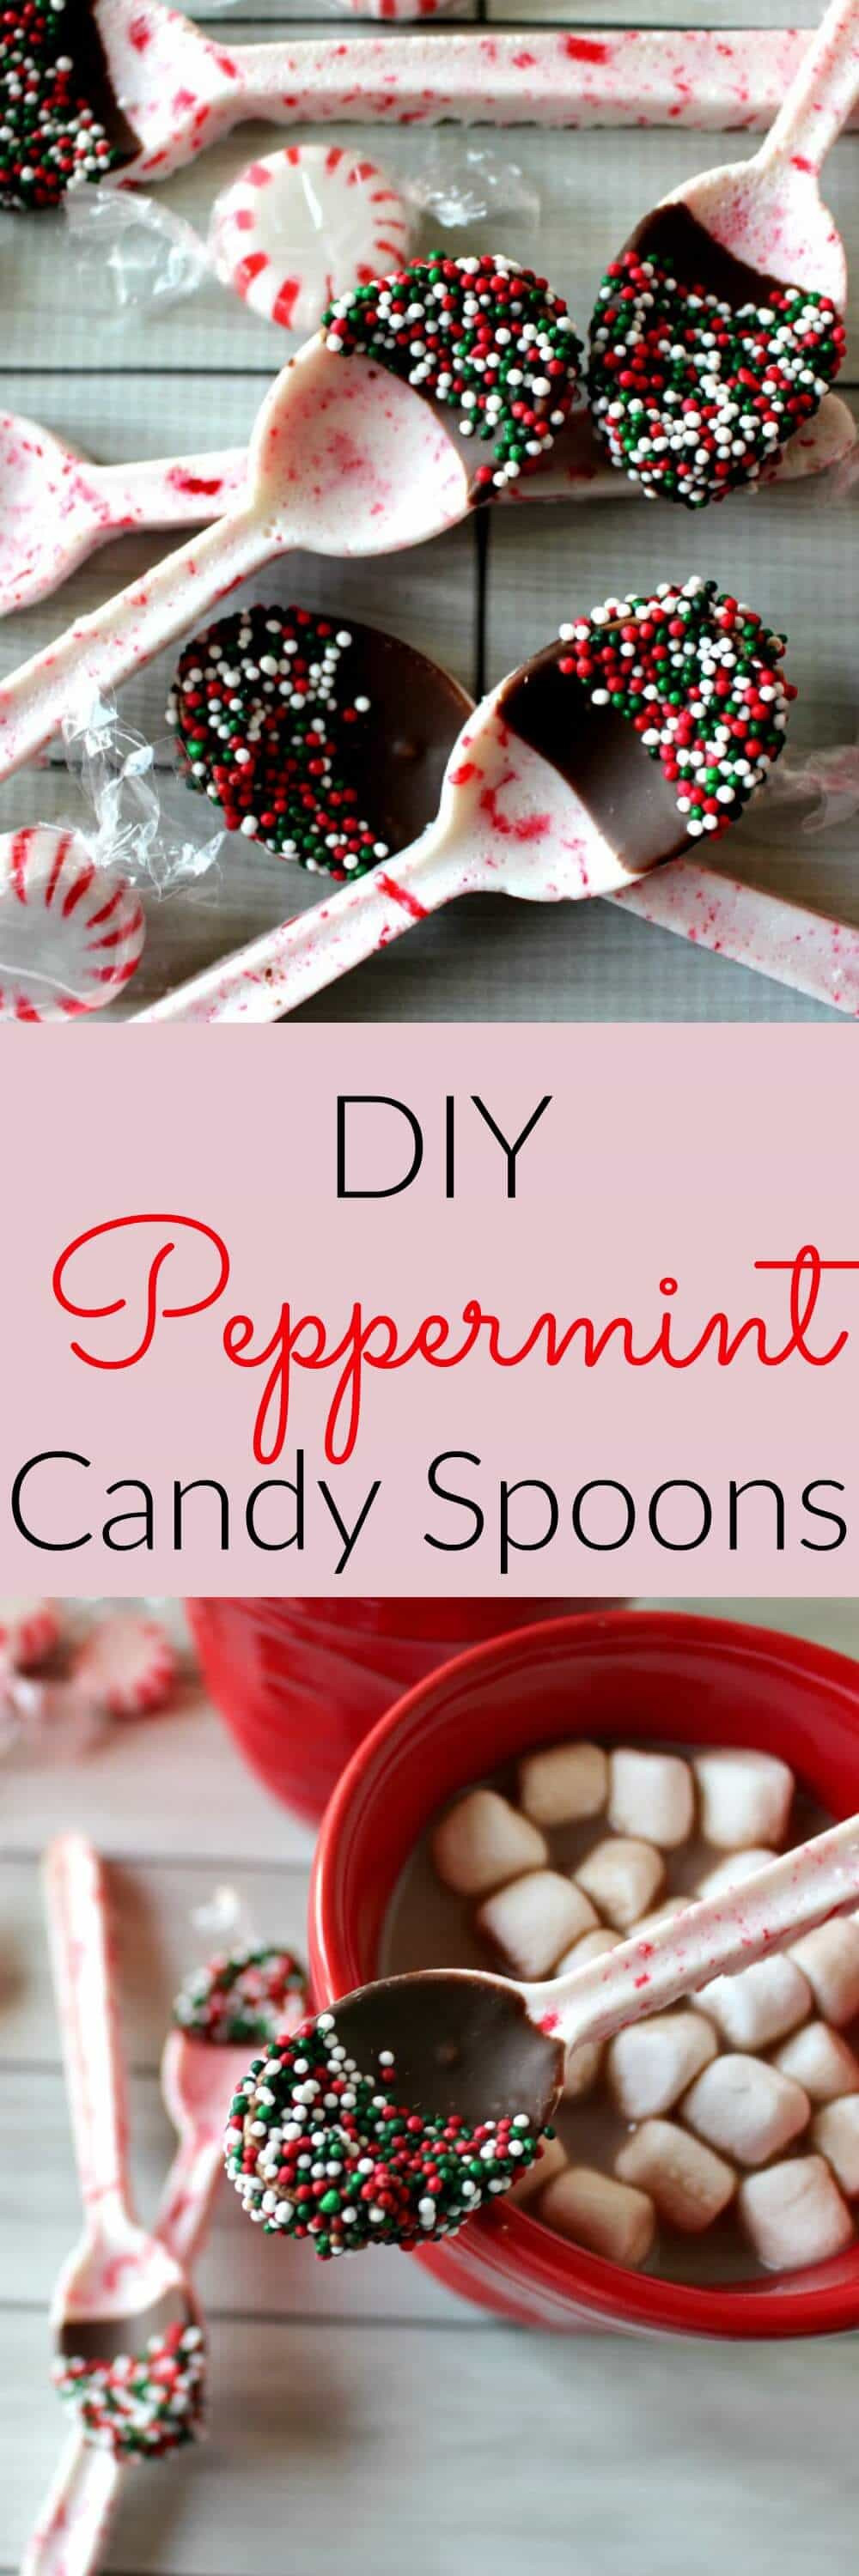 Christmas Peppermint Candy
 DIY Peppermint Candy Spoons Princess Pinky Girl